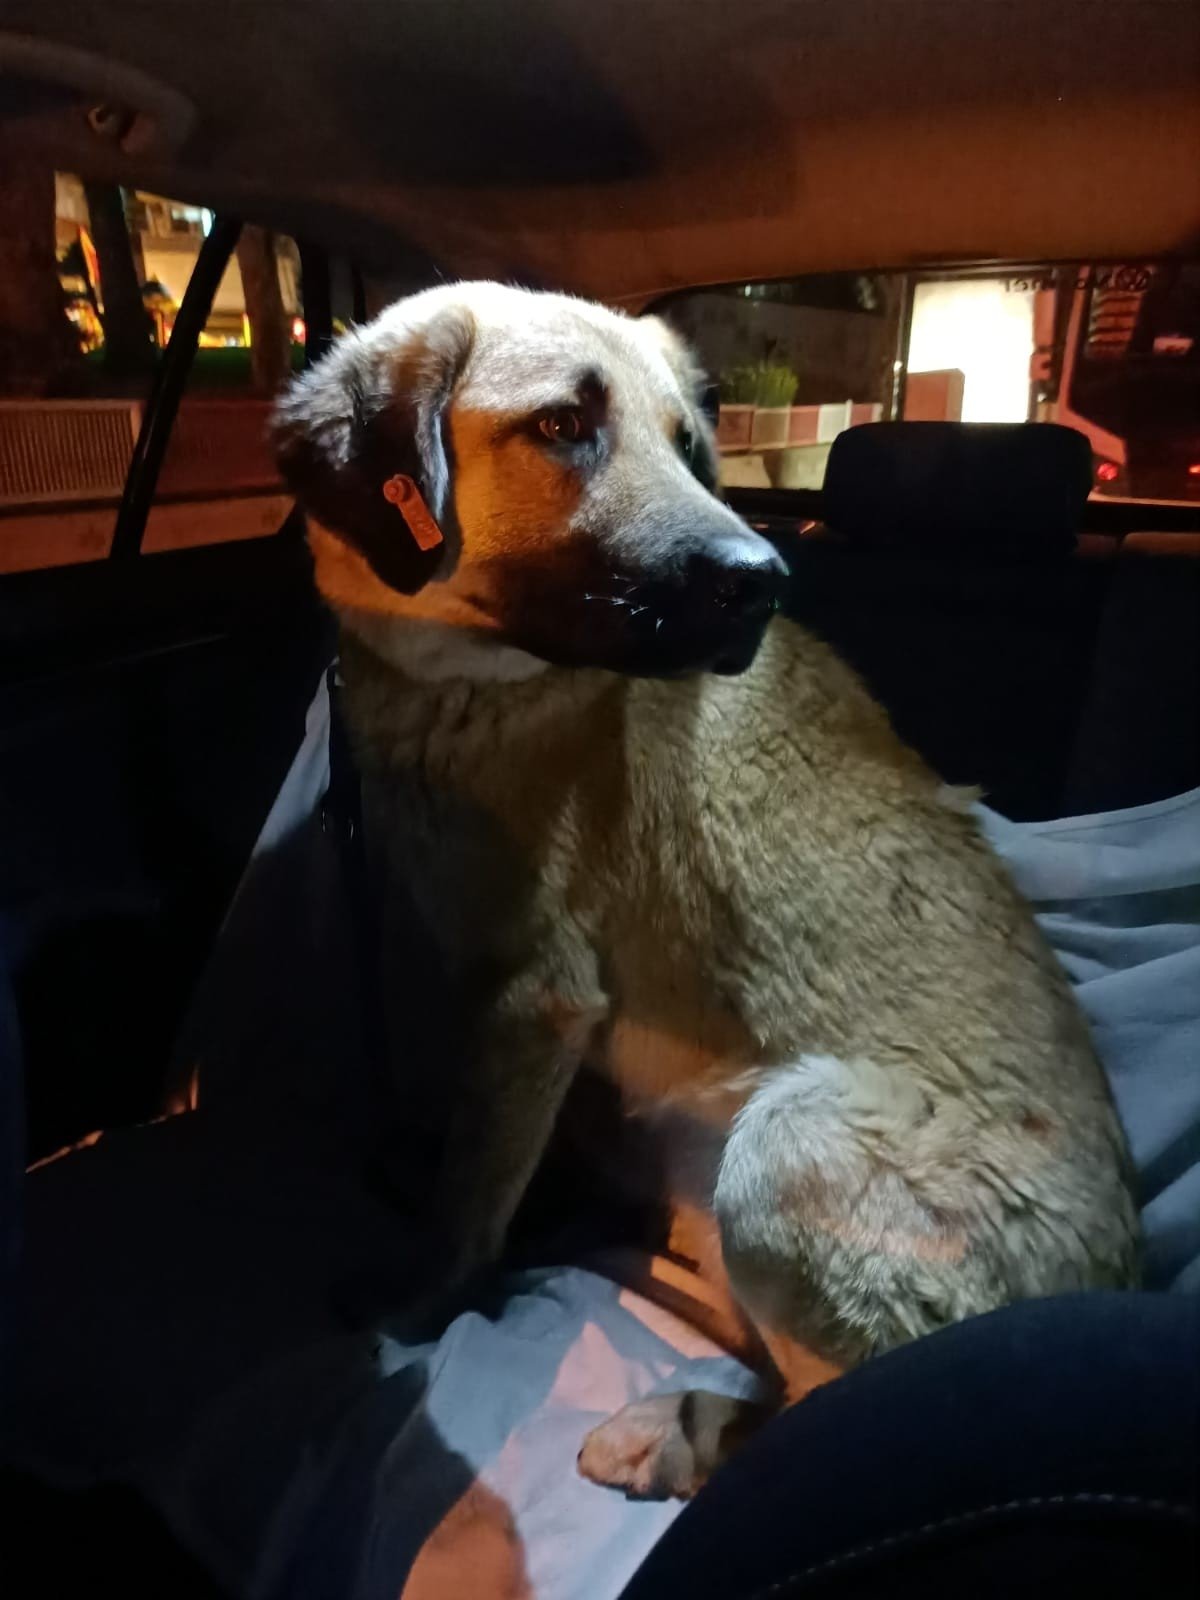 Sam the dog is seen in the back of a car for his final journey to his own neighborhood after being found by an activist, in Izmir, western Turkey, in this image provided on April 12, 2021. (IHA Photo)